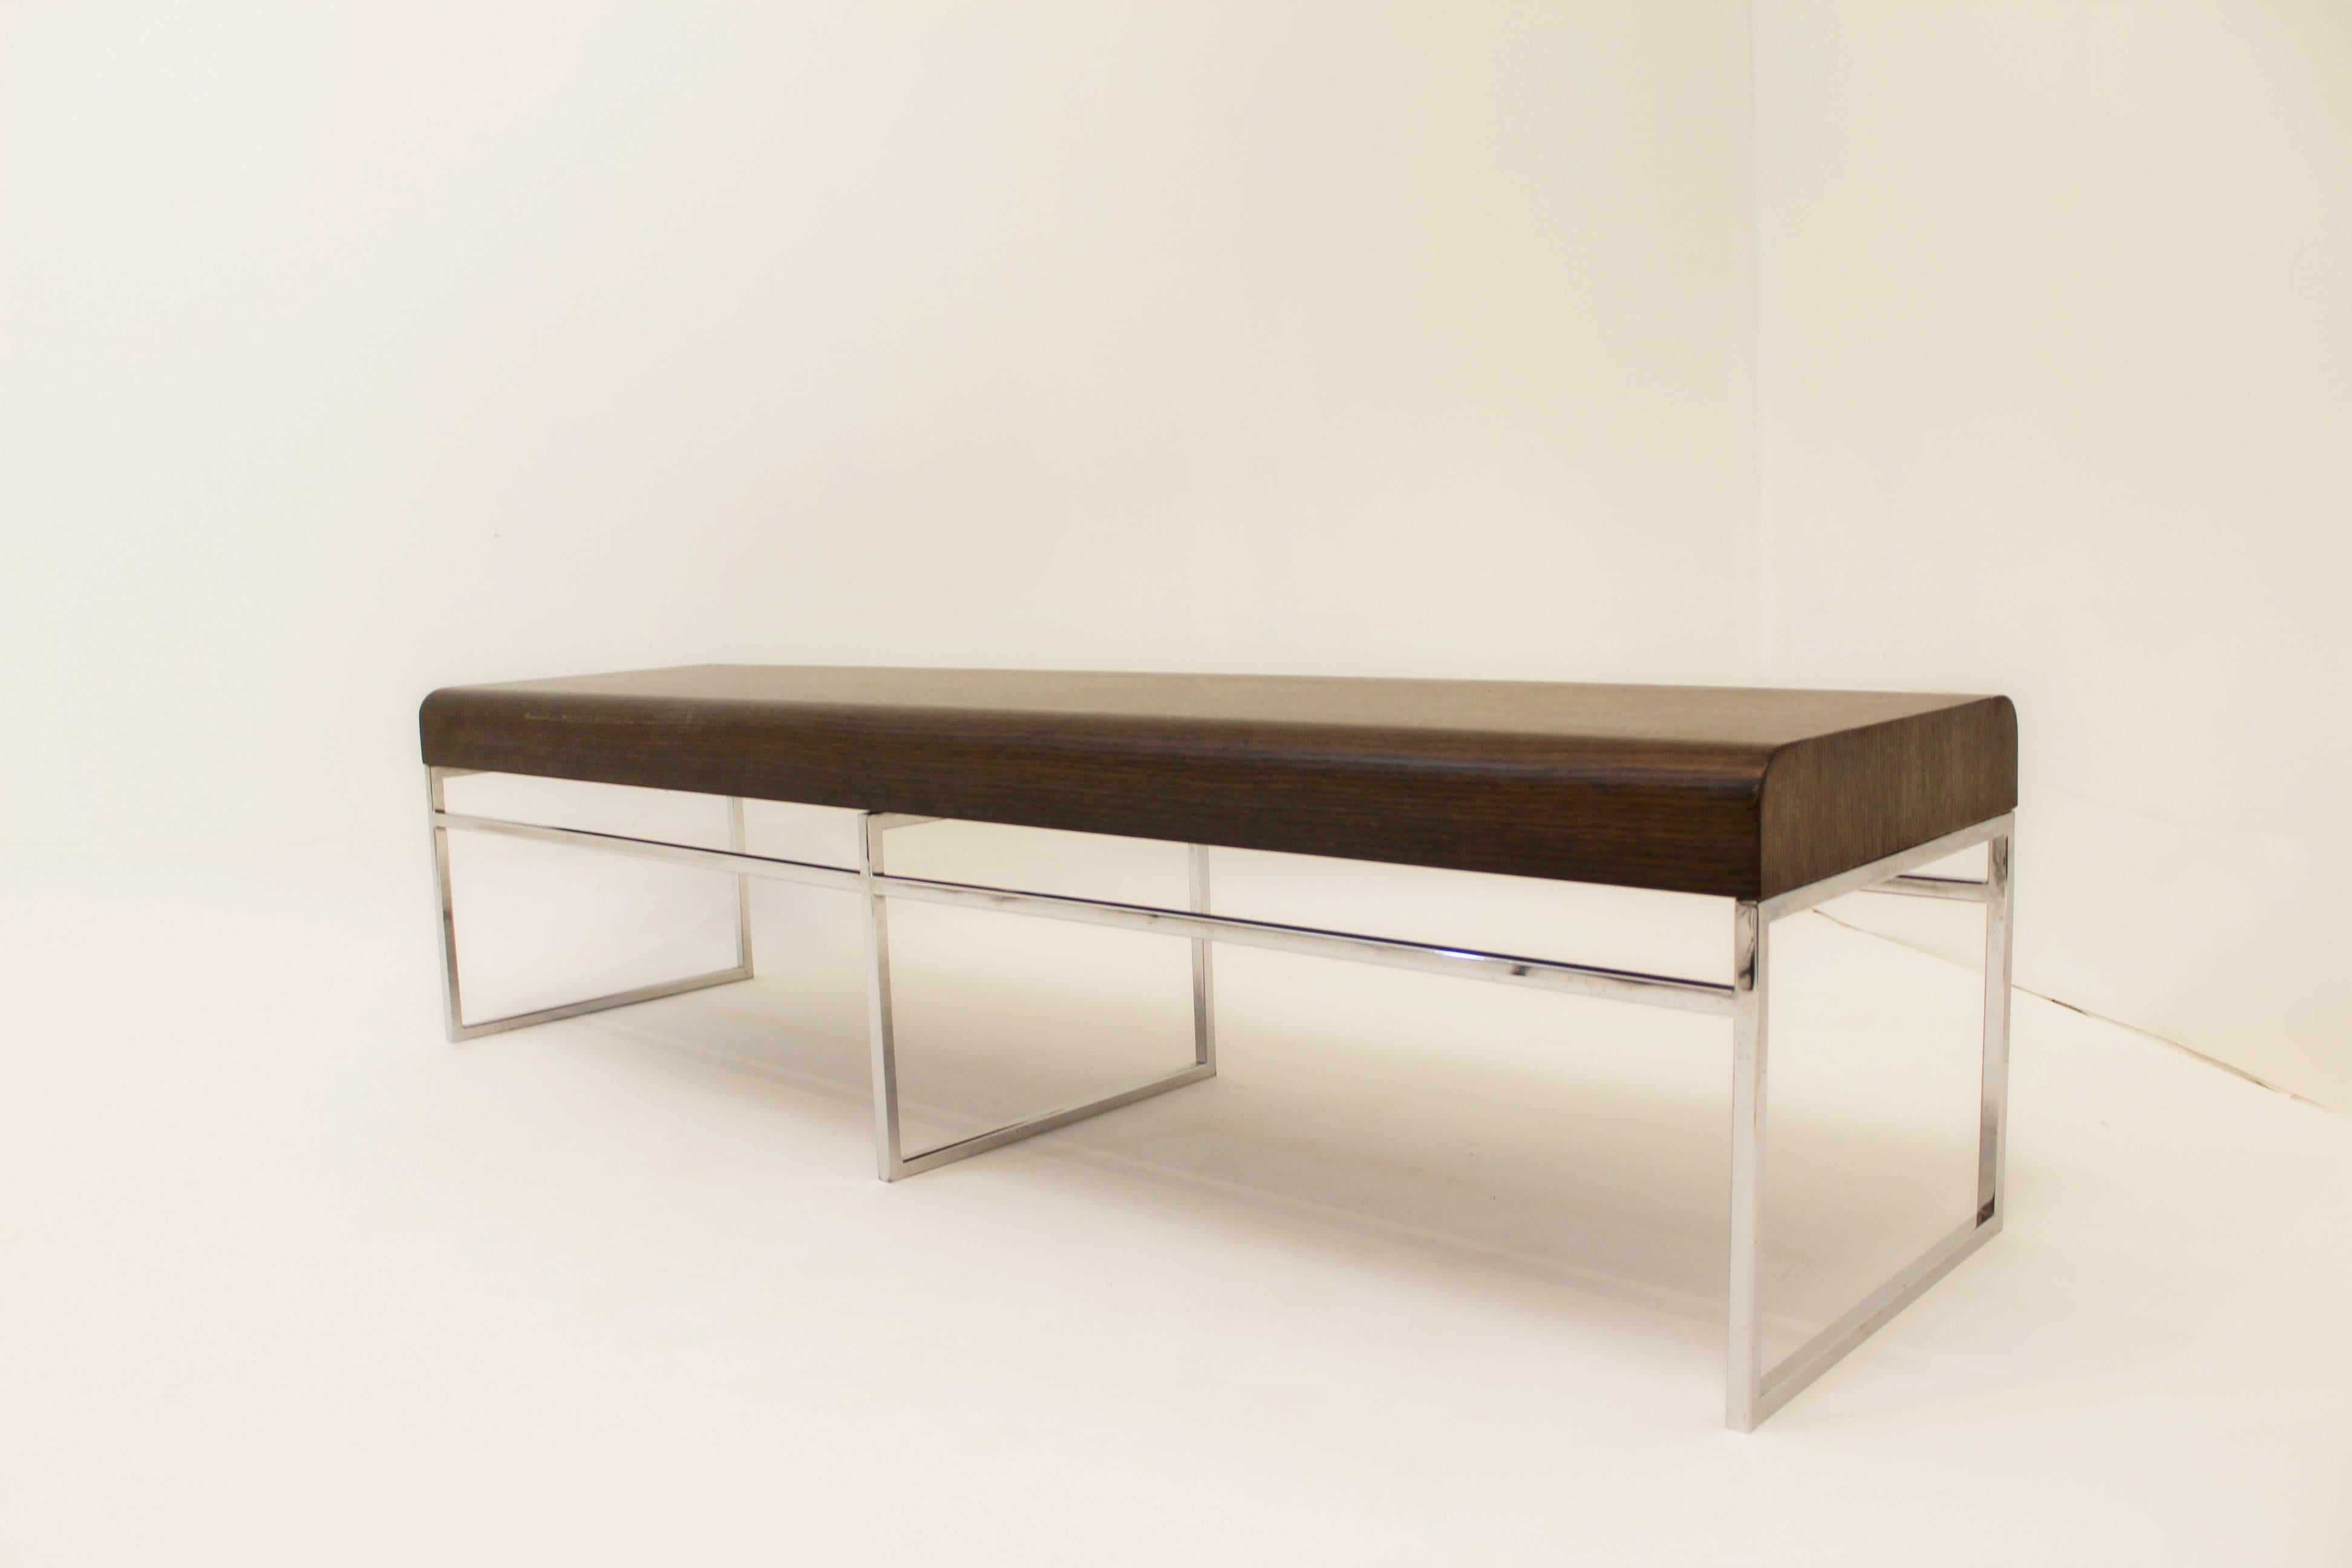 Maxalto Elios bench designed by Antonio Citterio. Polished chrome and grey oak top. In excellent condition. Measurements are H 15.25